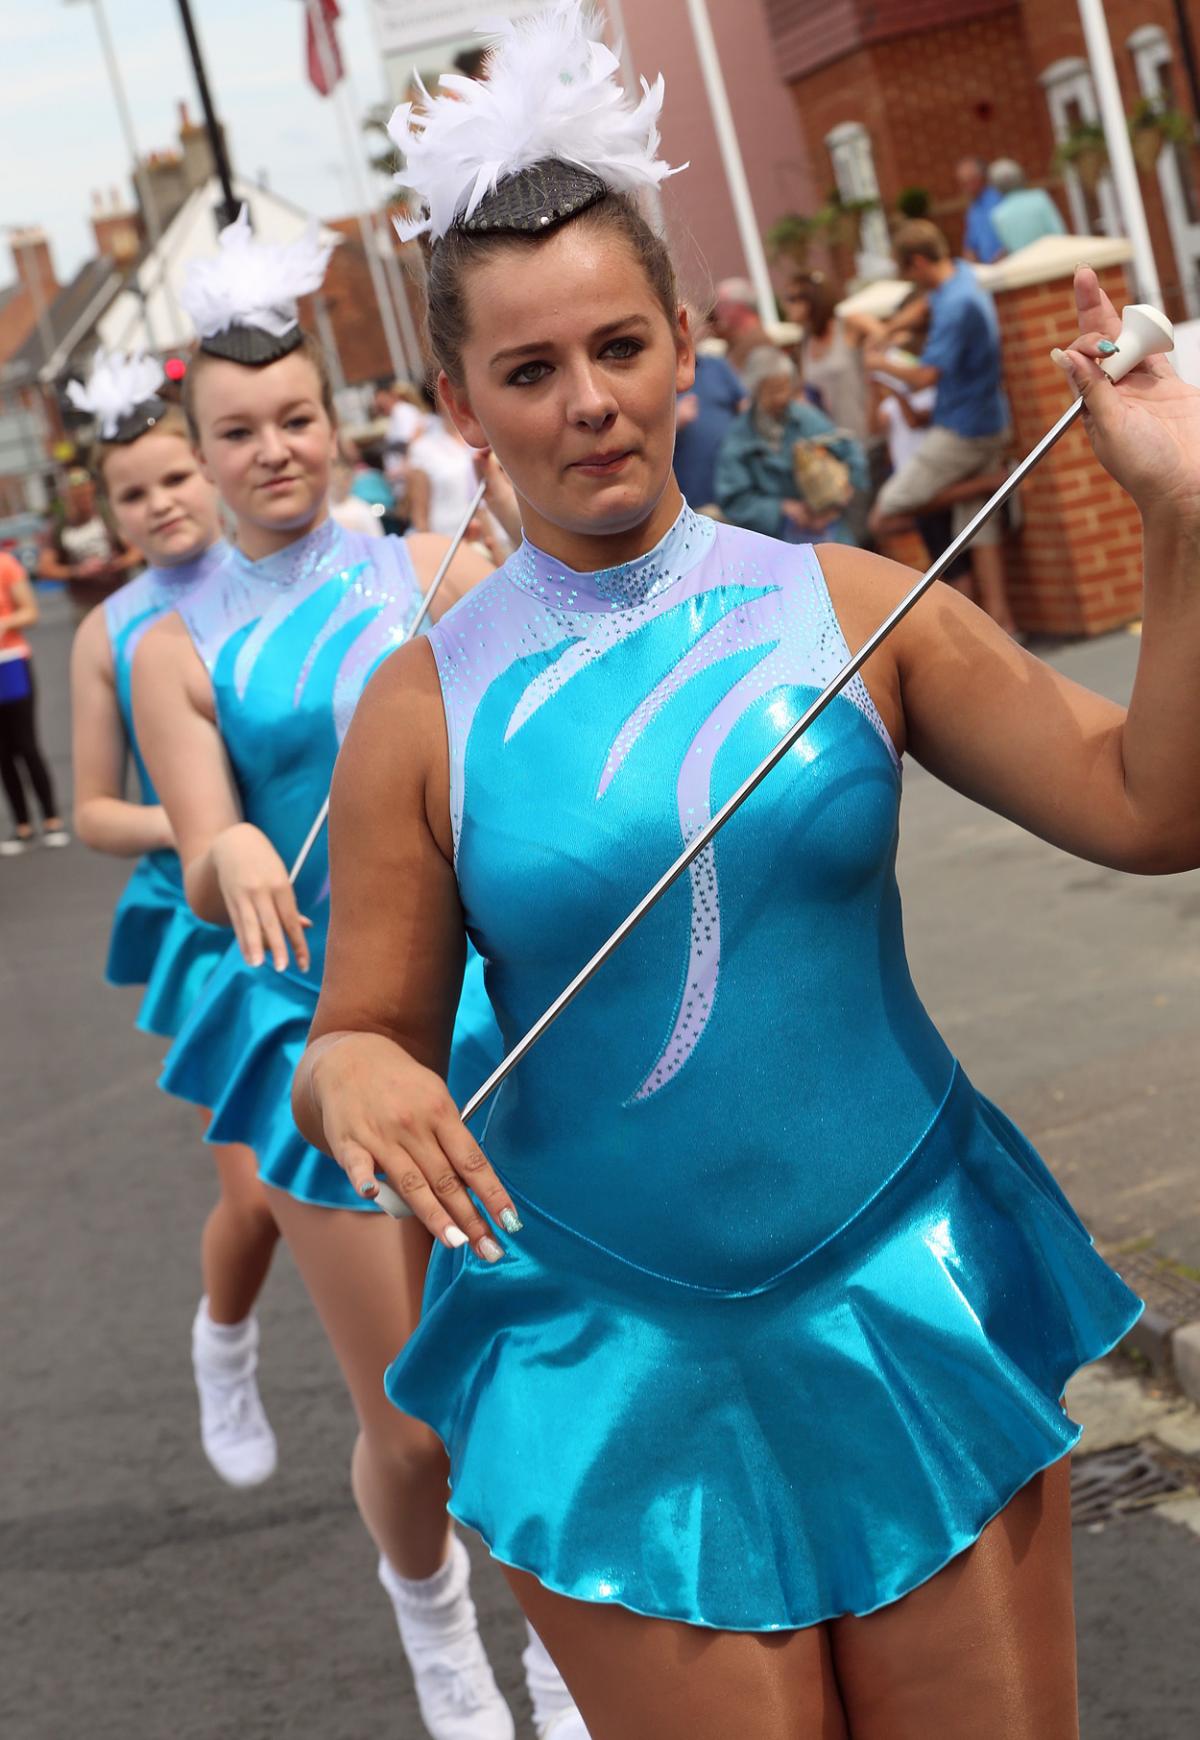 Pictures from the 2015 Christchurch Carnival by Sally Adams